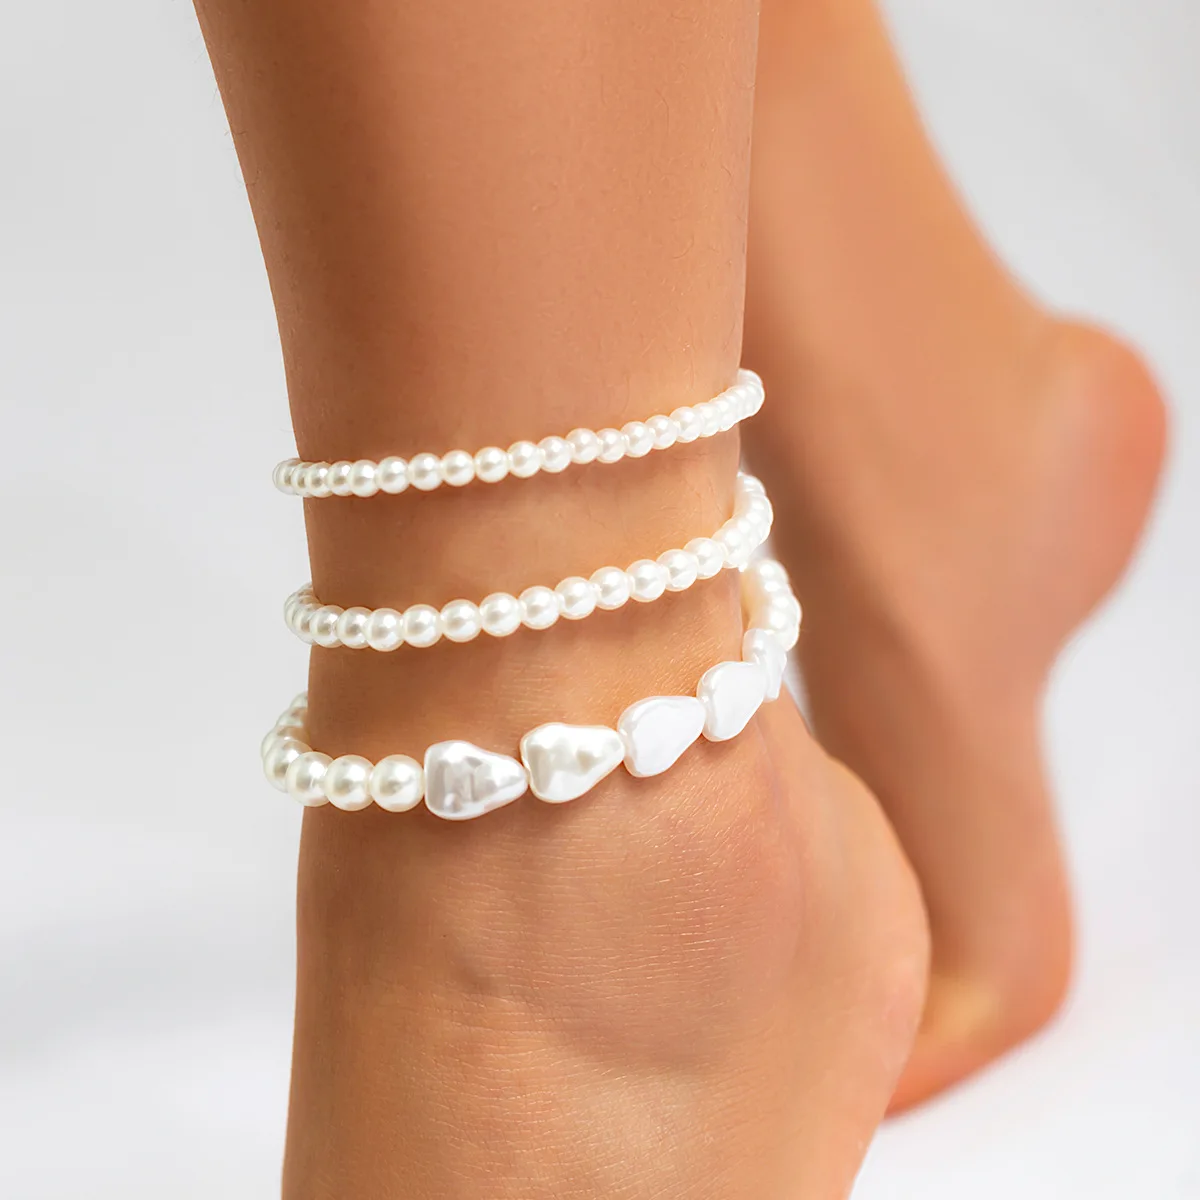 

Ourfuno Elegant Imitation Pearl Anklets For Women 3 Pcs/Set Minimalist Summer Beach Anklets Simple Fashion Jewelry Girls Gift